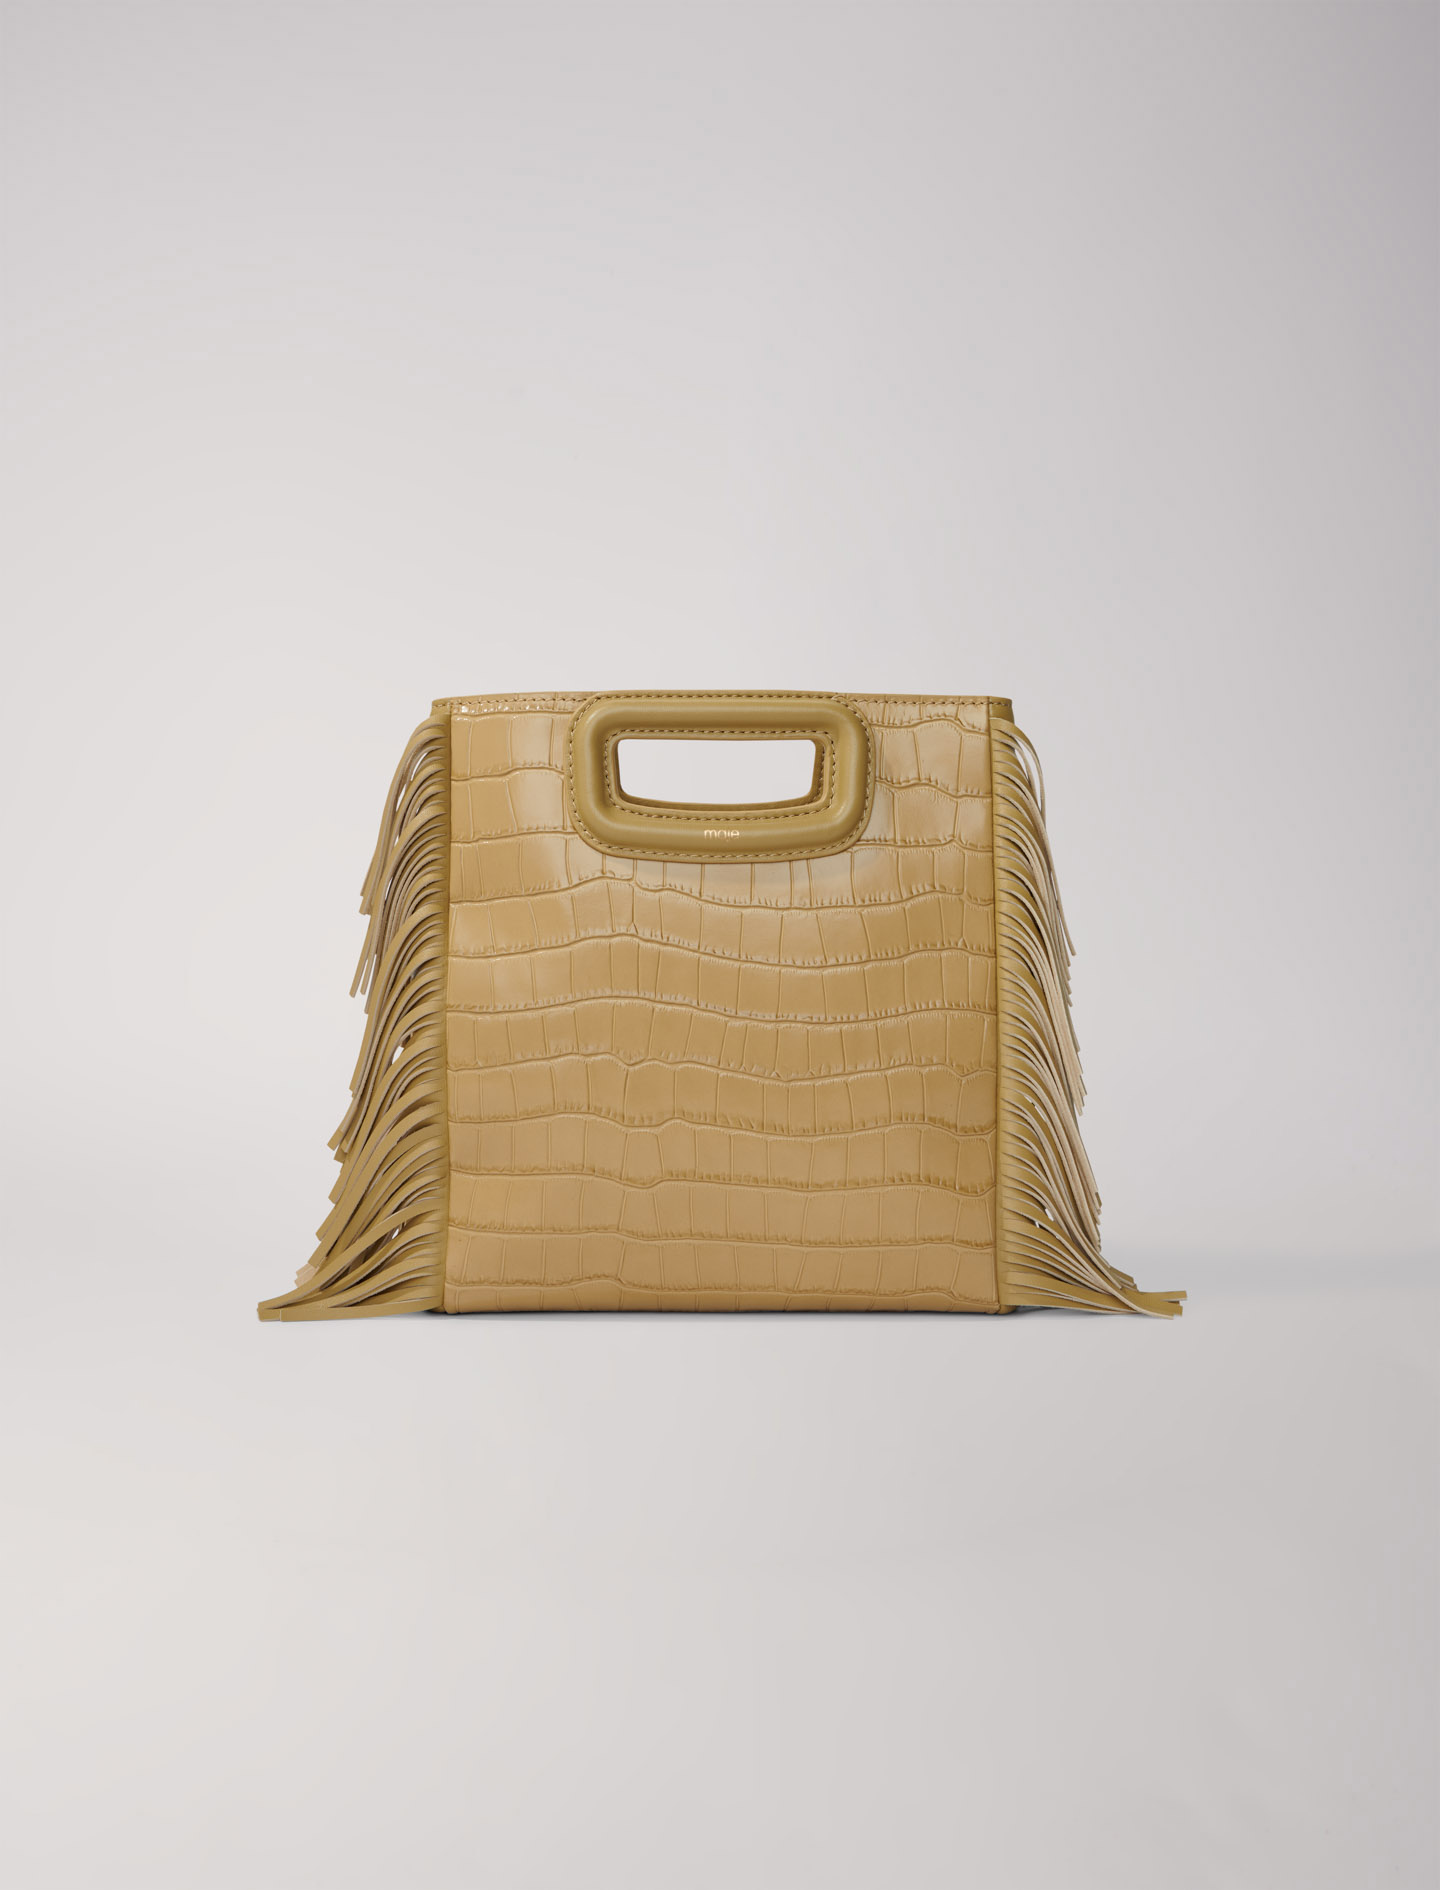 Mixte's polyester Leather: M bag in crocodile-effect leather for Spring/Summer, size Mixte-All Bags-OS (ONE SIZE), in color Beige / Beige